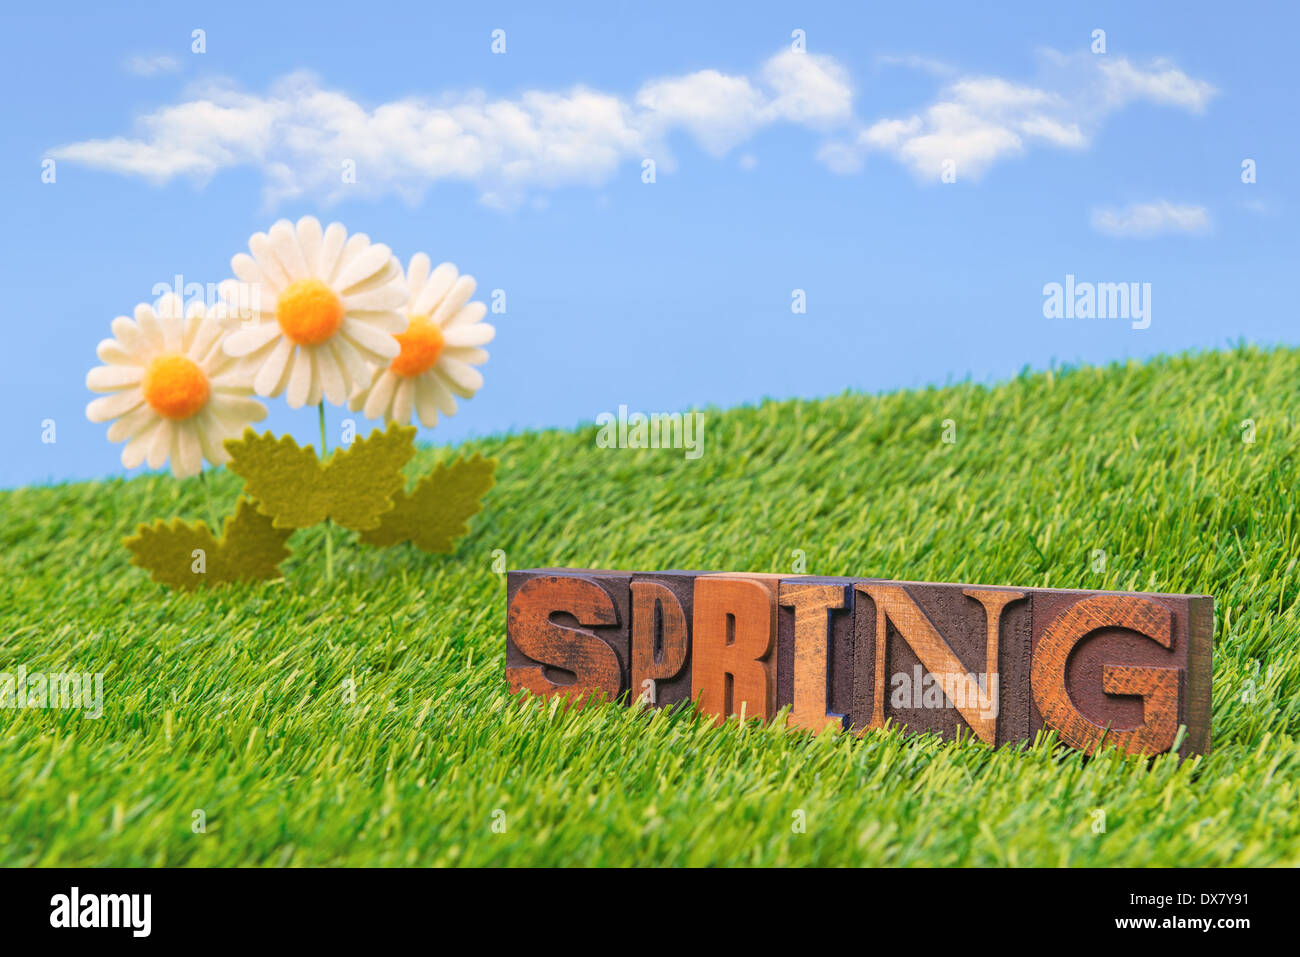 The word Spring in old wooden letterpress with green grass, white daisies and a bright blue sky with white fluffy clouds. Stock Photo